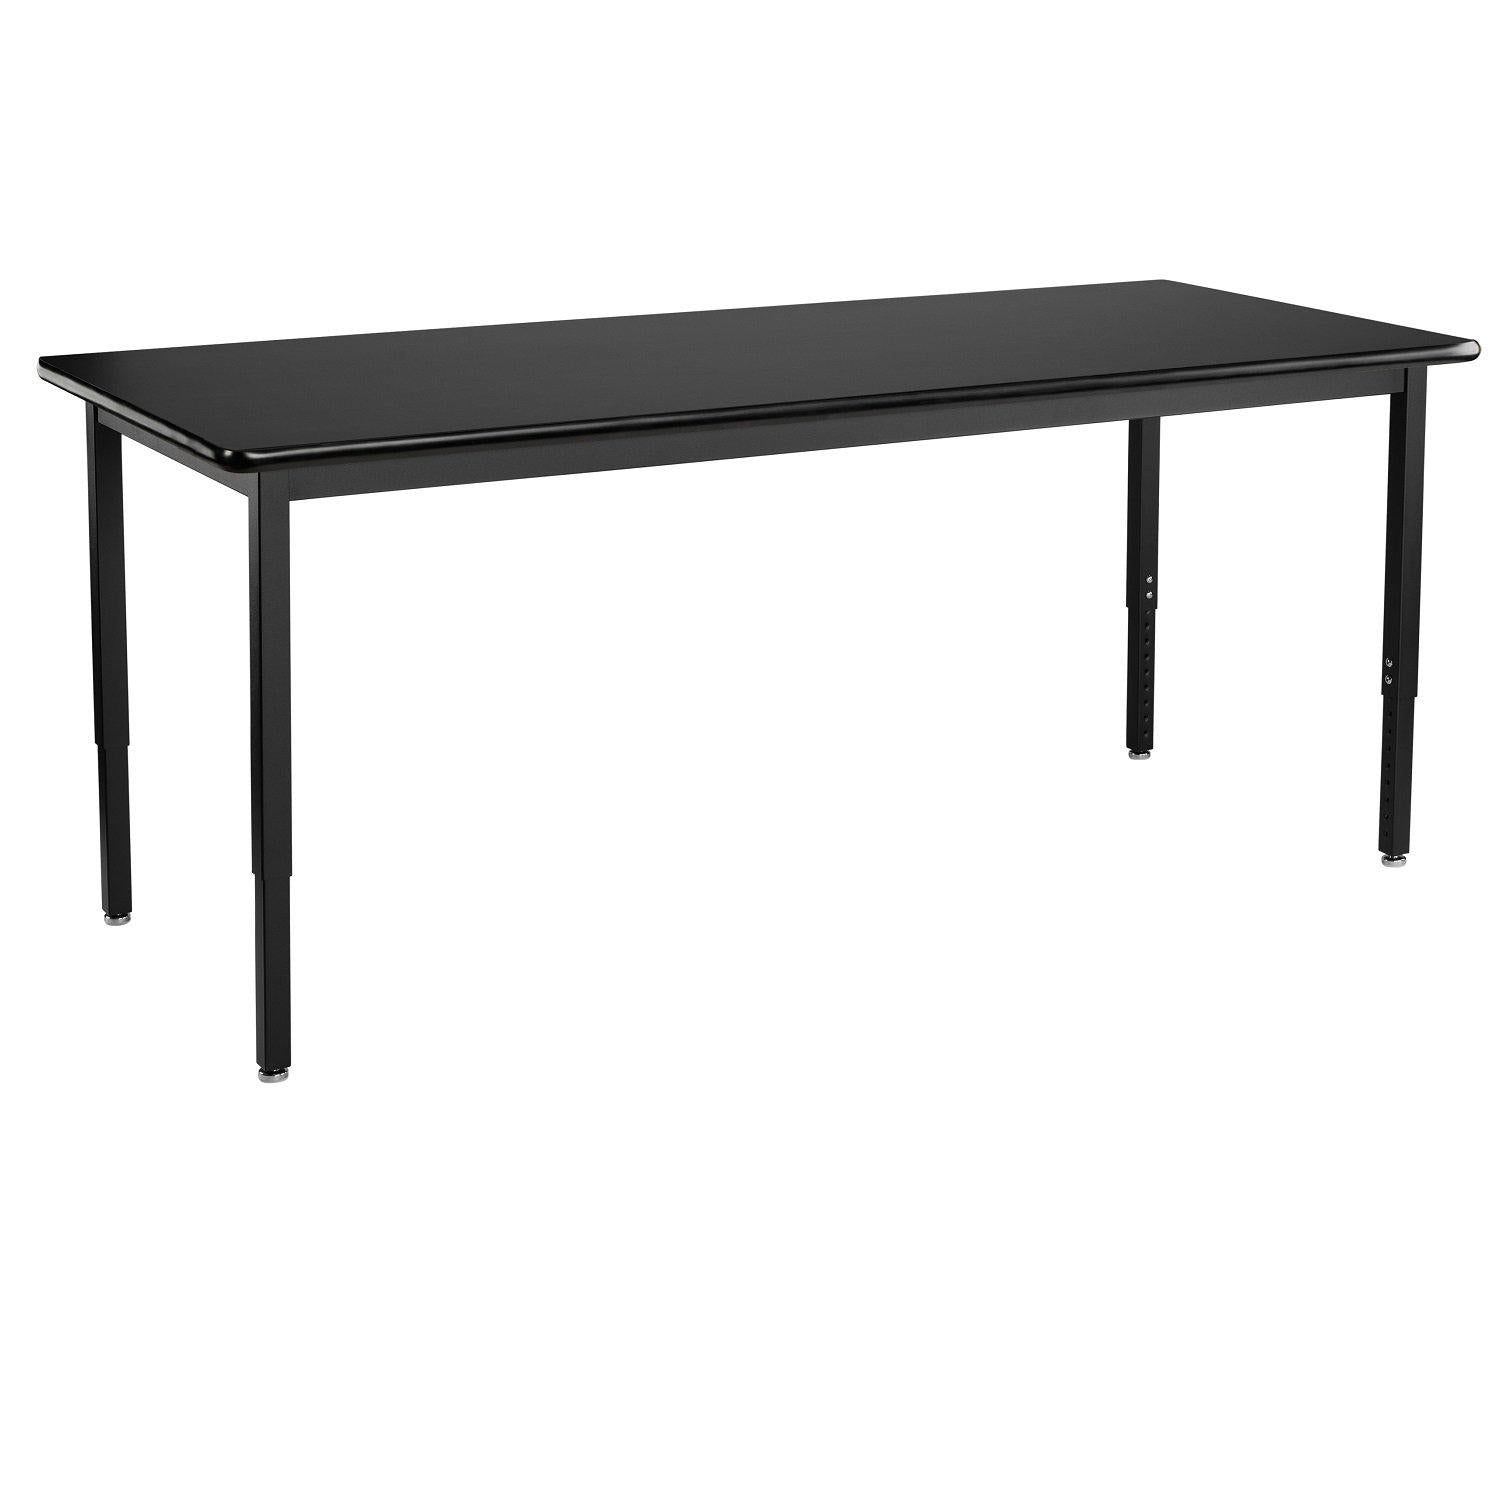 Heavy-Duty Height-Adjustable Utility Table, Black Frame, 24" x 72", High-Pressure Laminate Top with T-Mold Edge